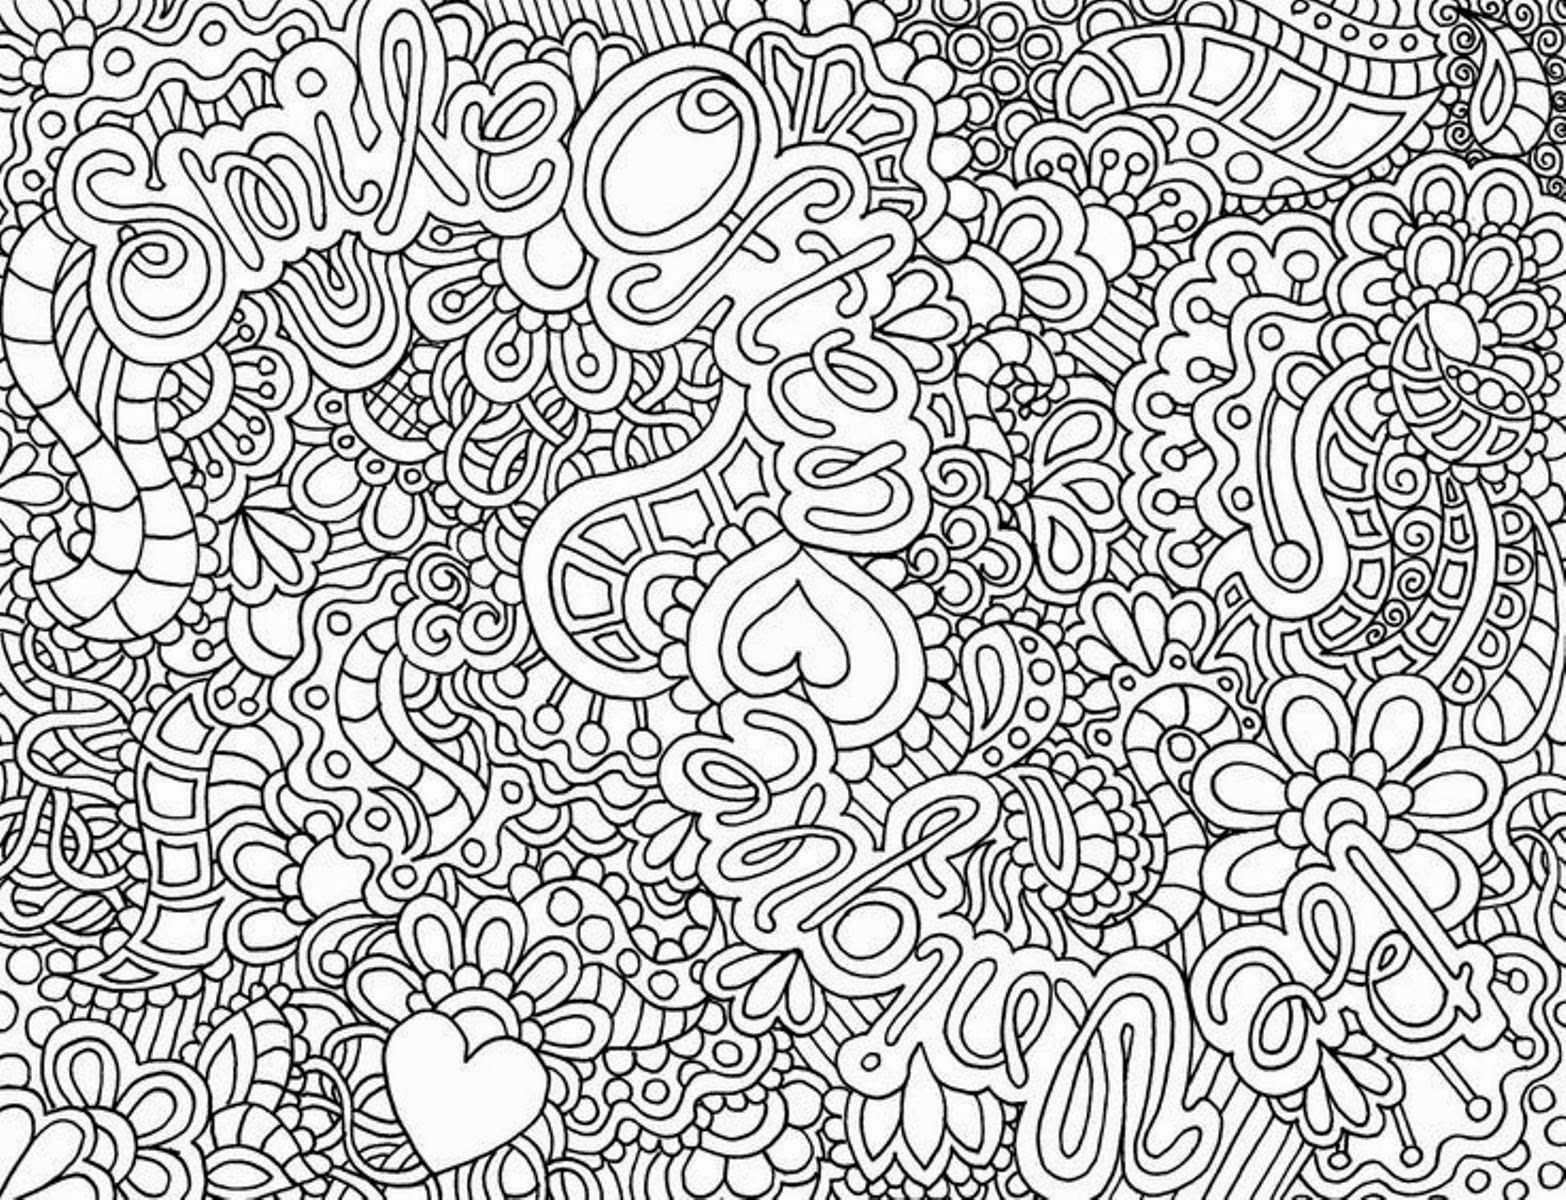 Cool Coloring Sheets For Teenagers | Coloring Online